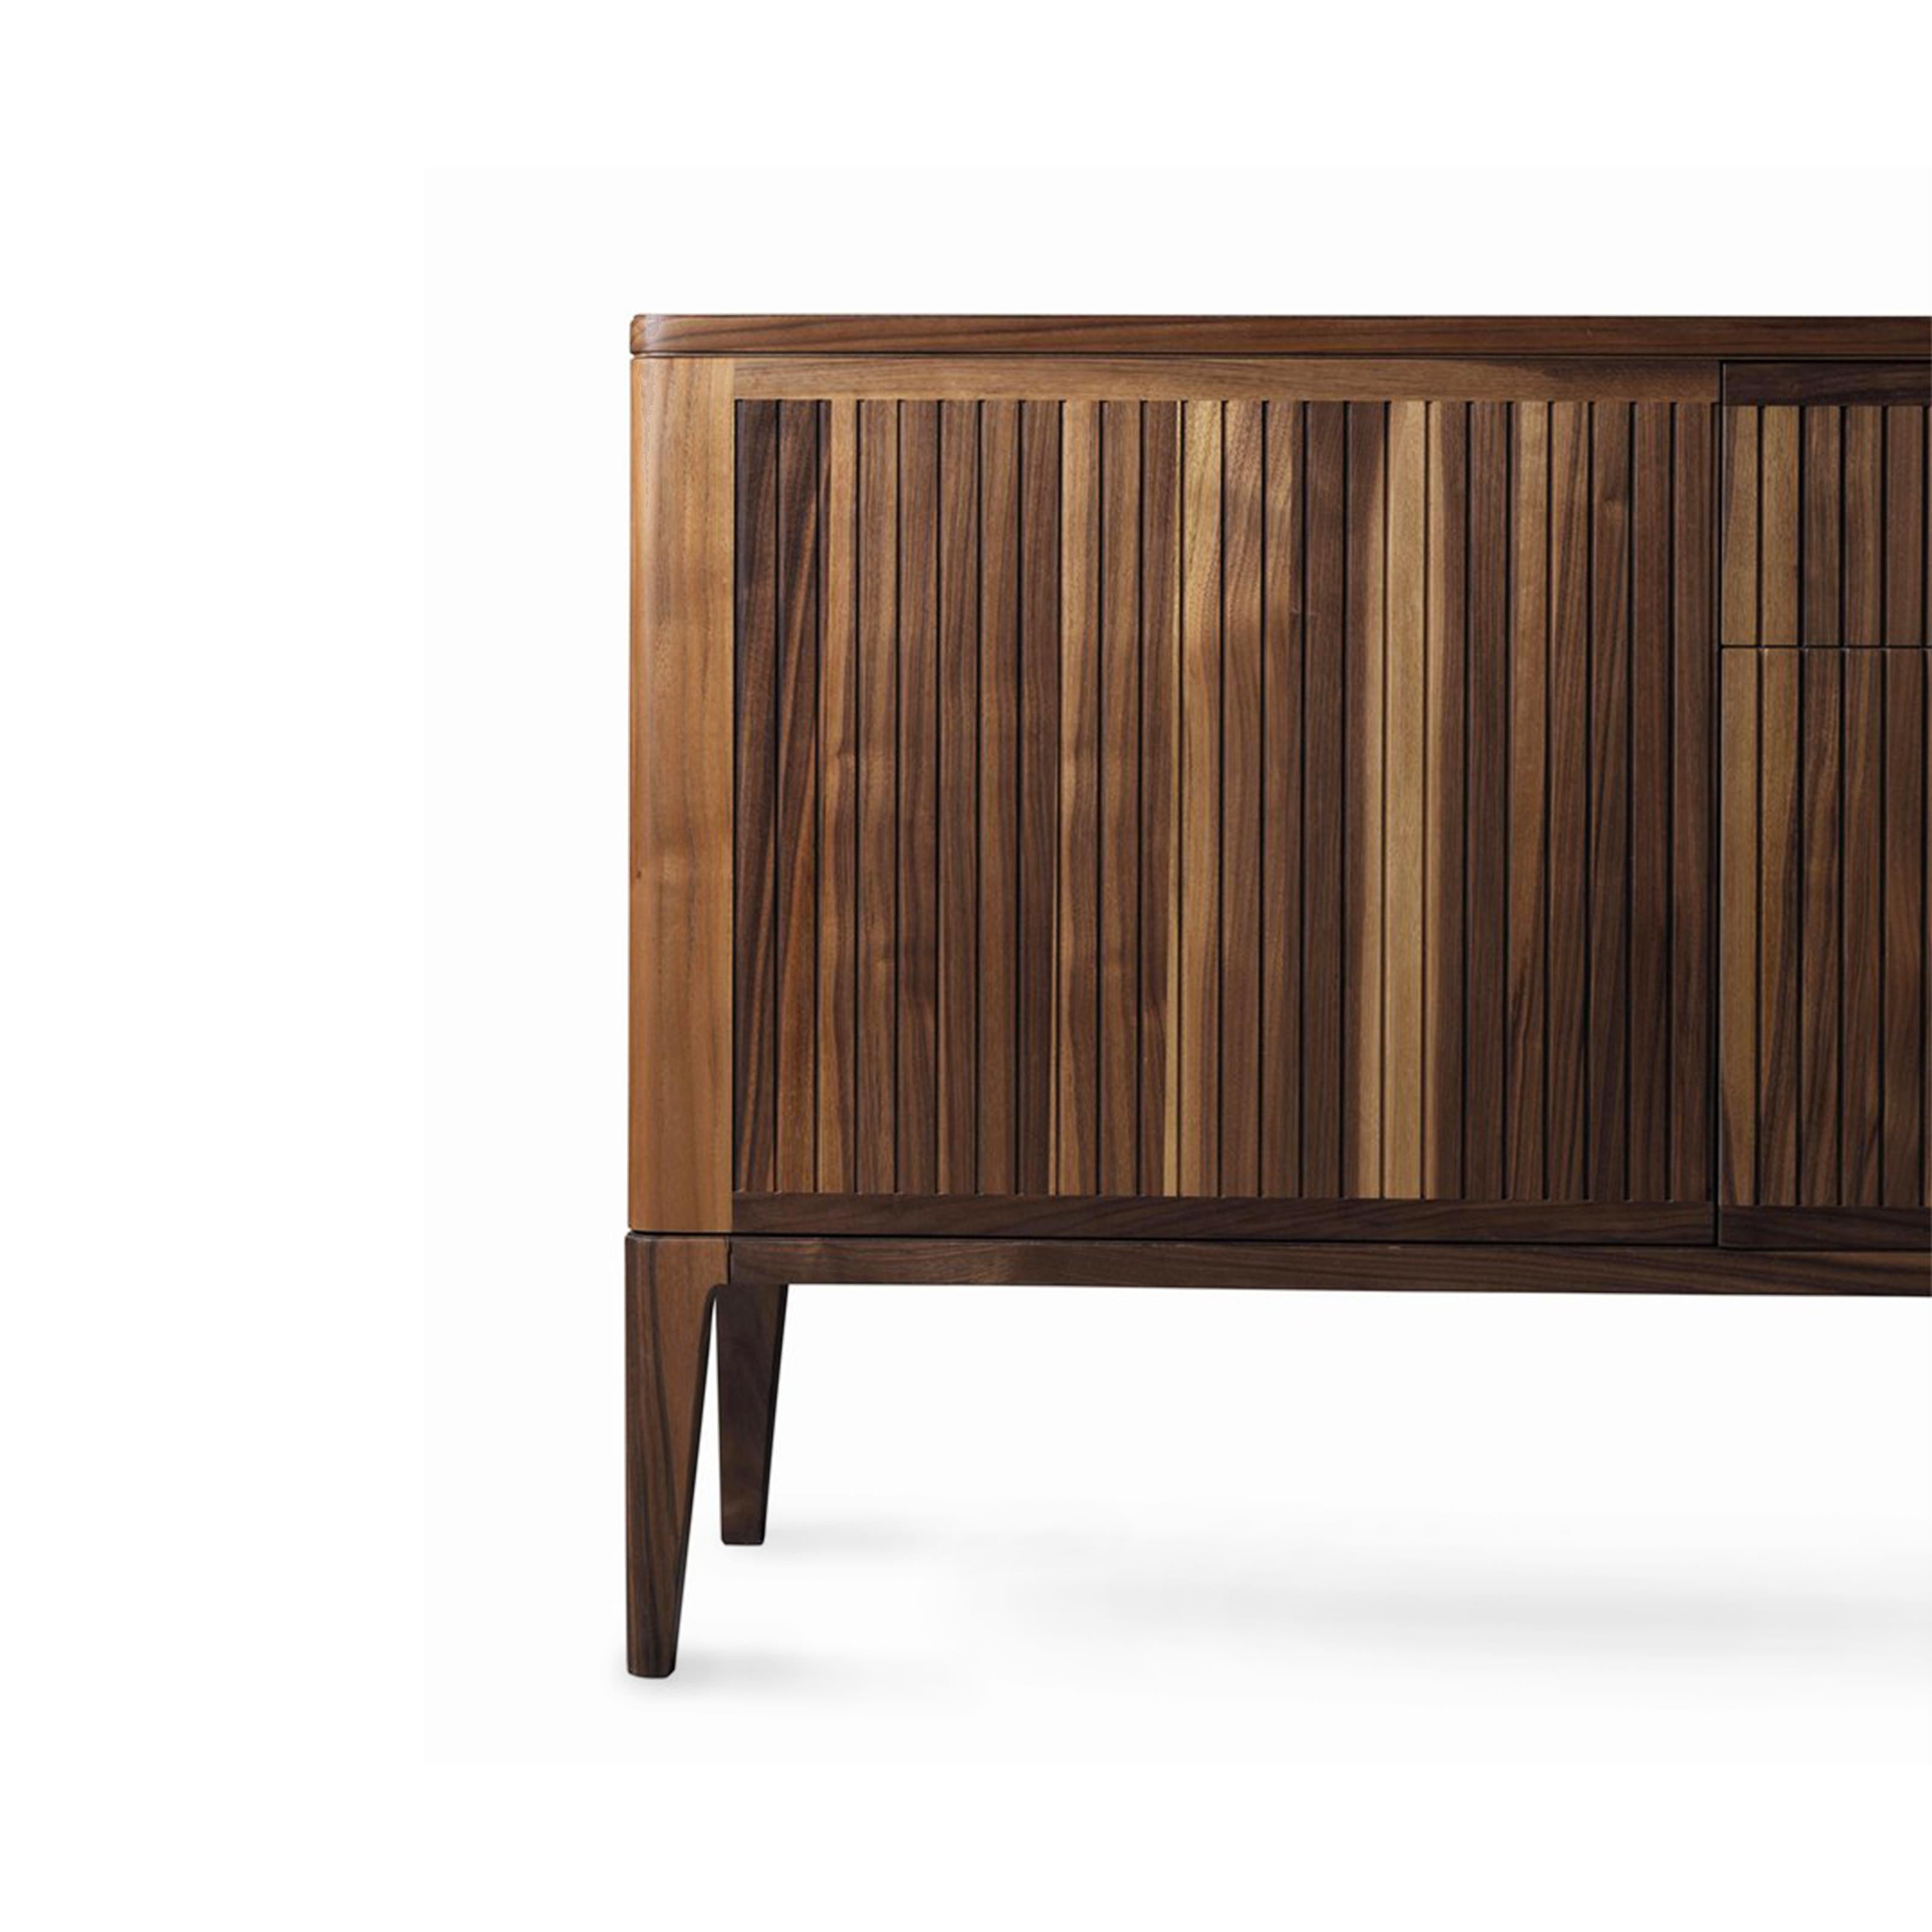 Italian Eleva Solid Wood Sideboard, Walnut in Hand-Made Natural Finish, Contemporary For Sale